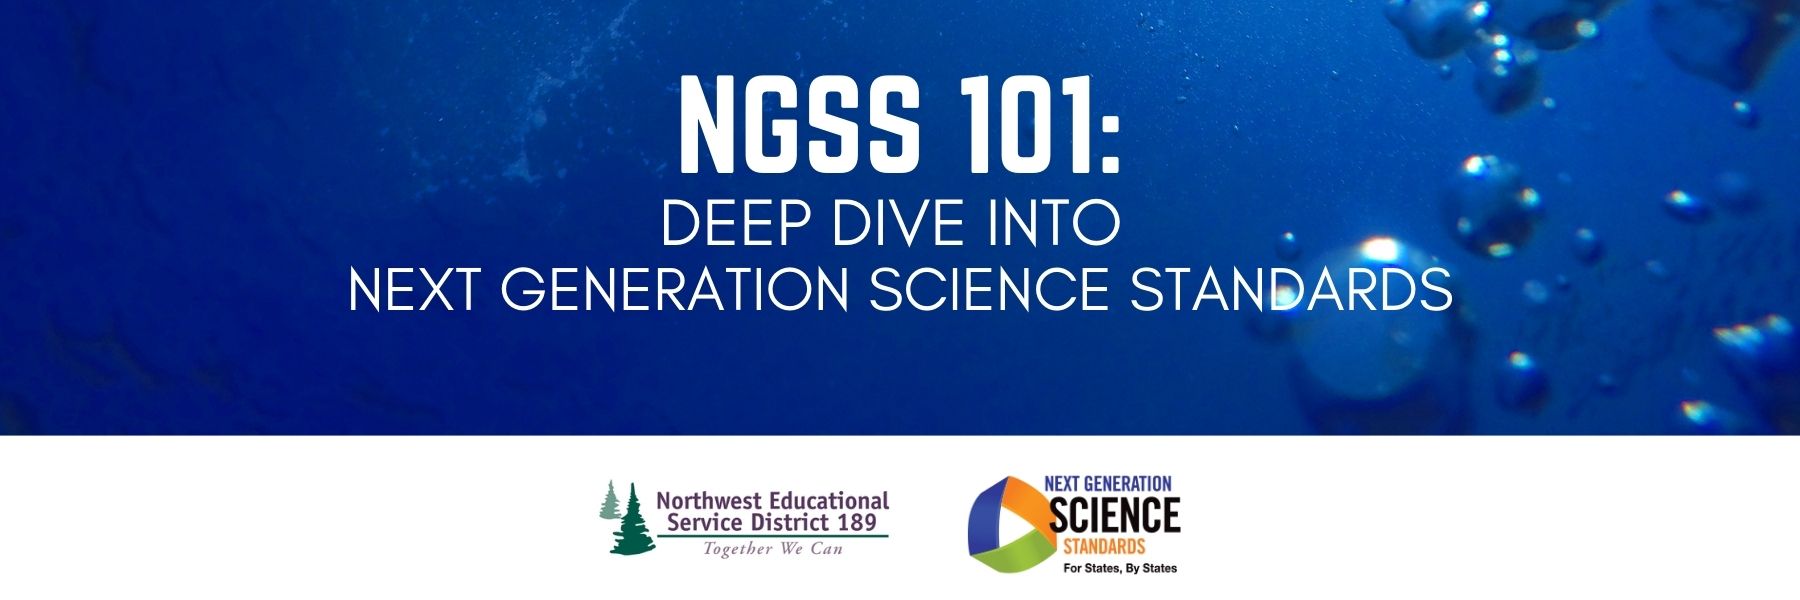 NGSS 101